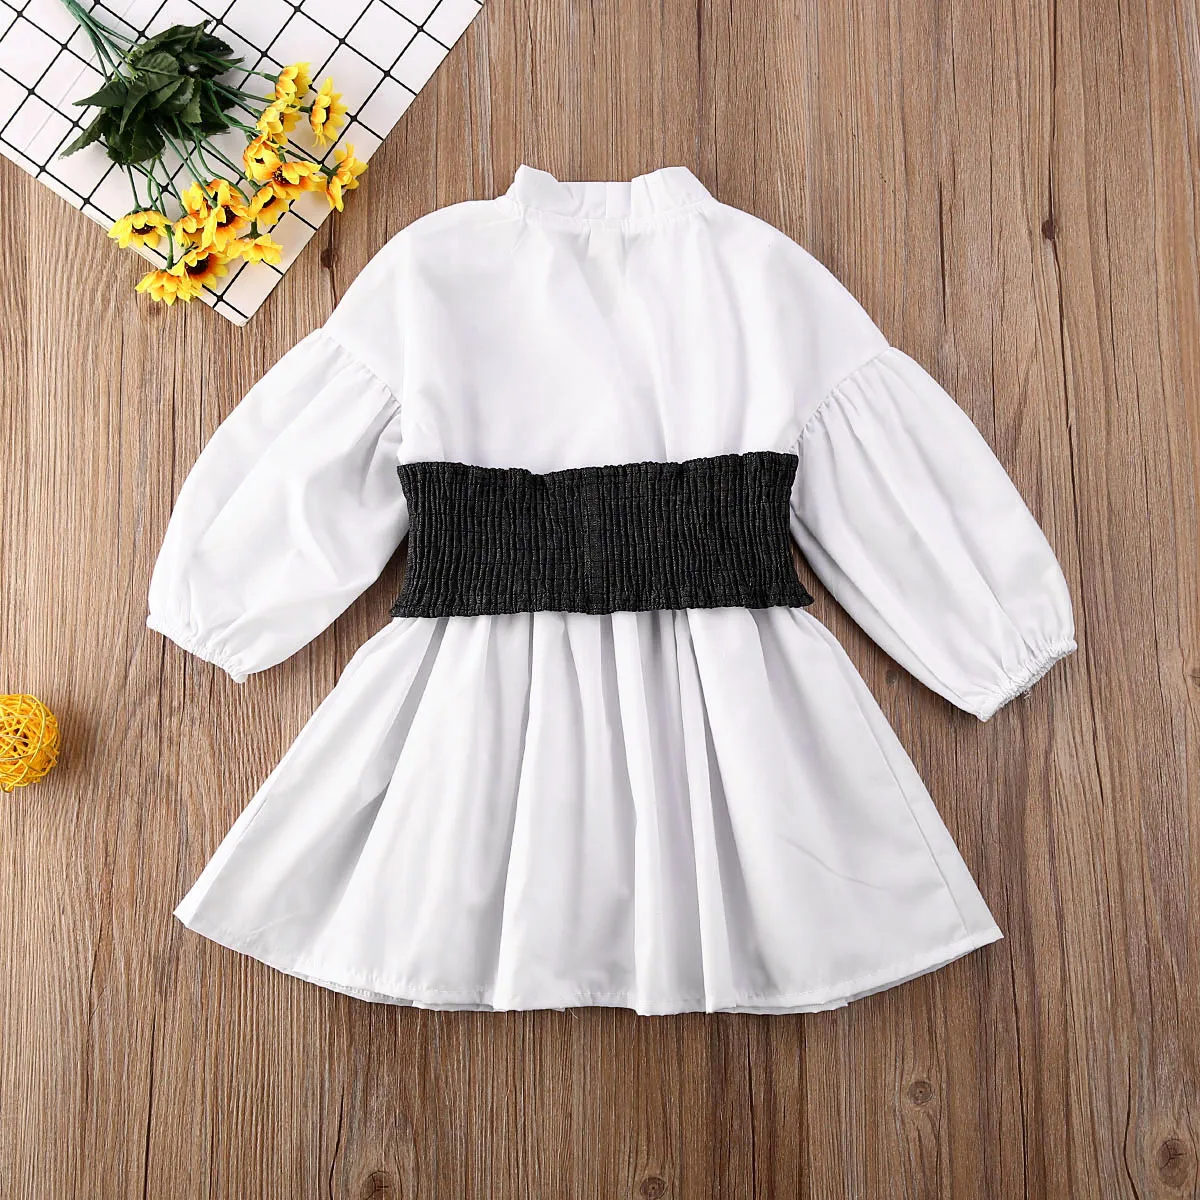 2020 Baby Spring Autumn Clothing Toddler Kid Girl Clothes Long Puff Sleeve Wasit Shirt Top Dress Outfit With Elastic Girdle | Детская - Фото №1